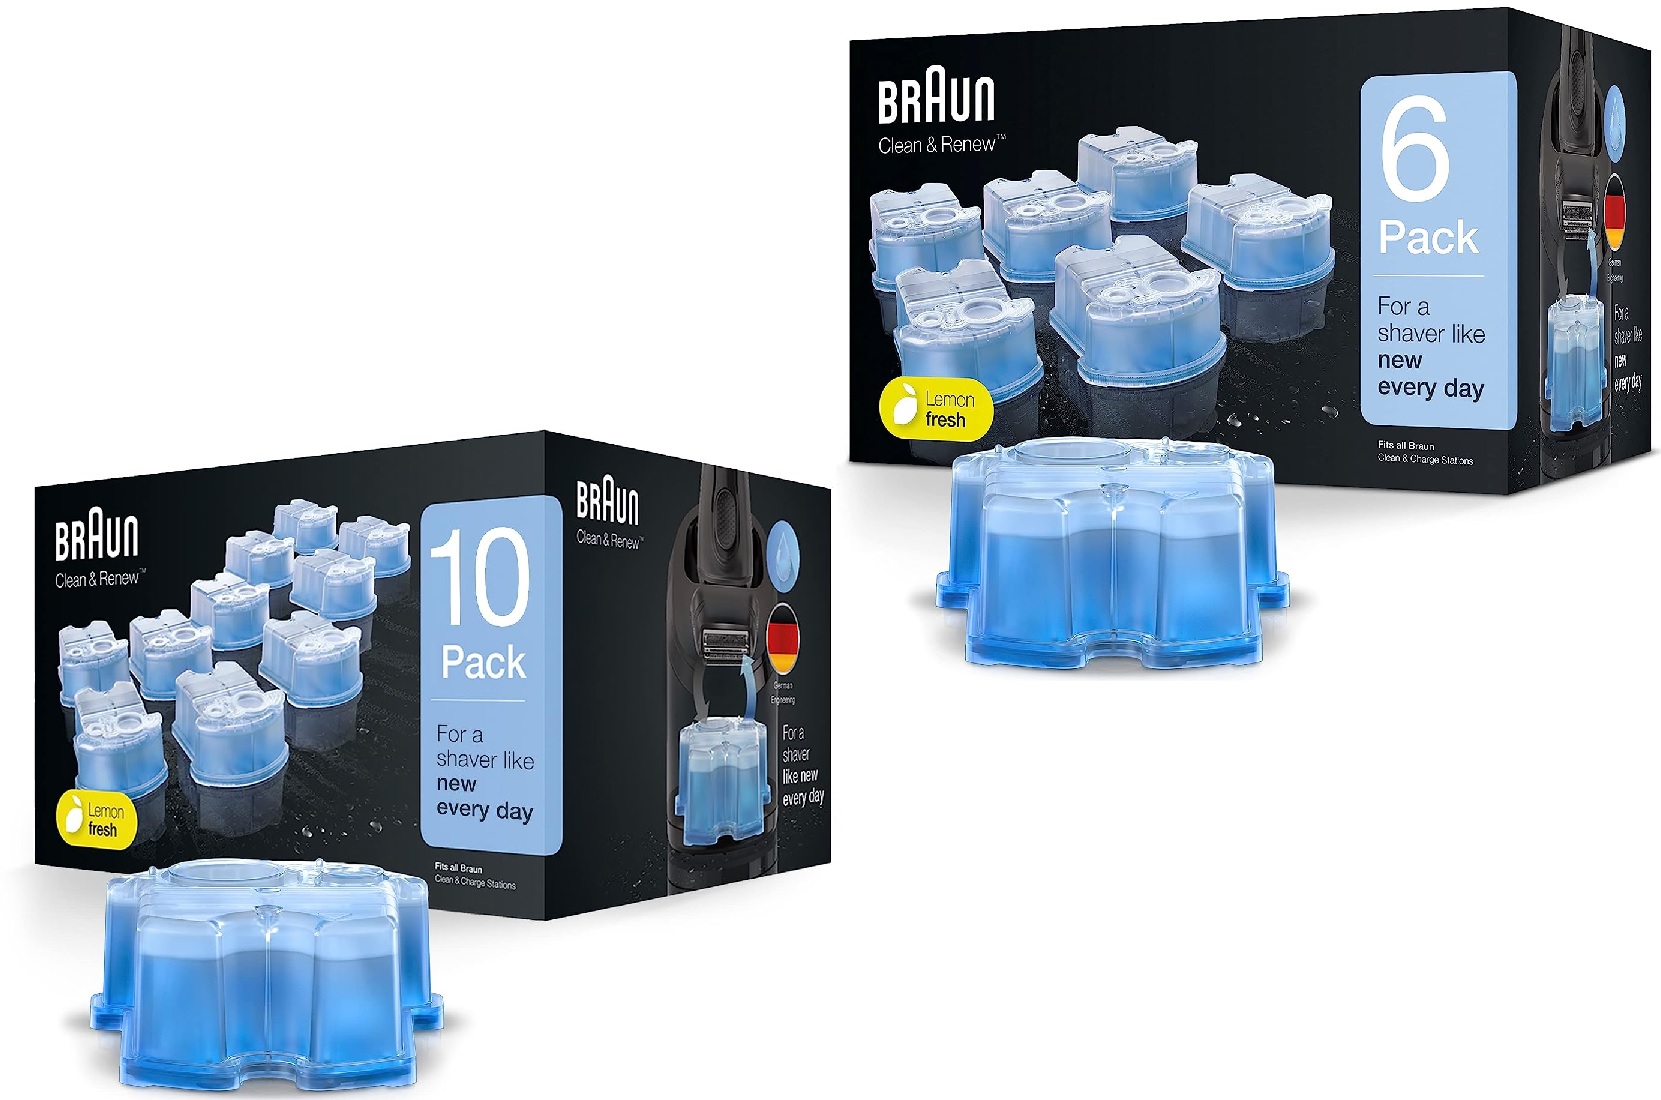 16-Count Braun Clean & Renew Refill Cartridges CCR + $20 Amazon.com Credit $80.35 w/ S&S + Free Shipping